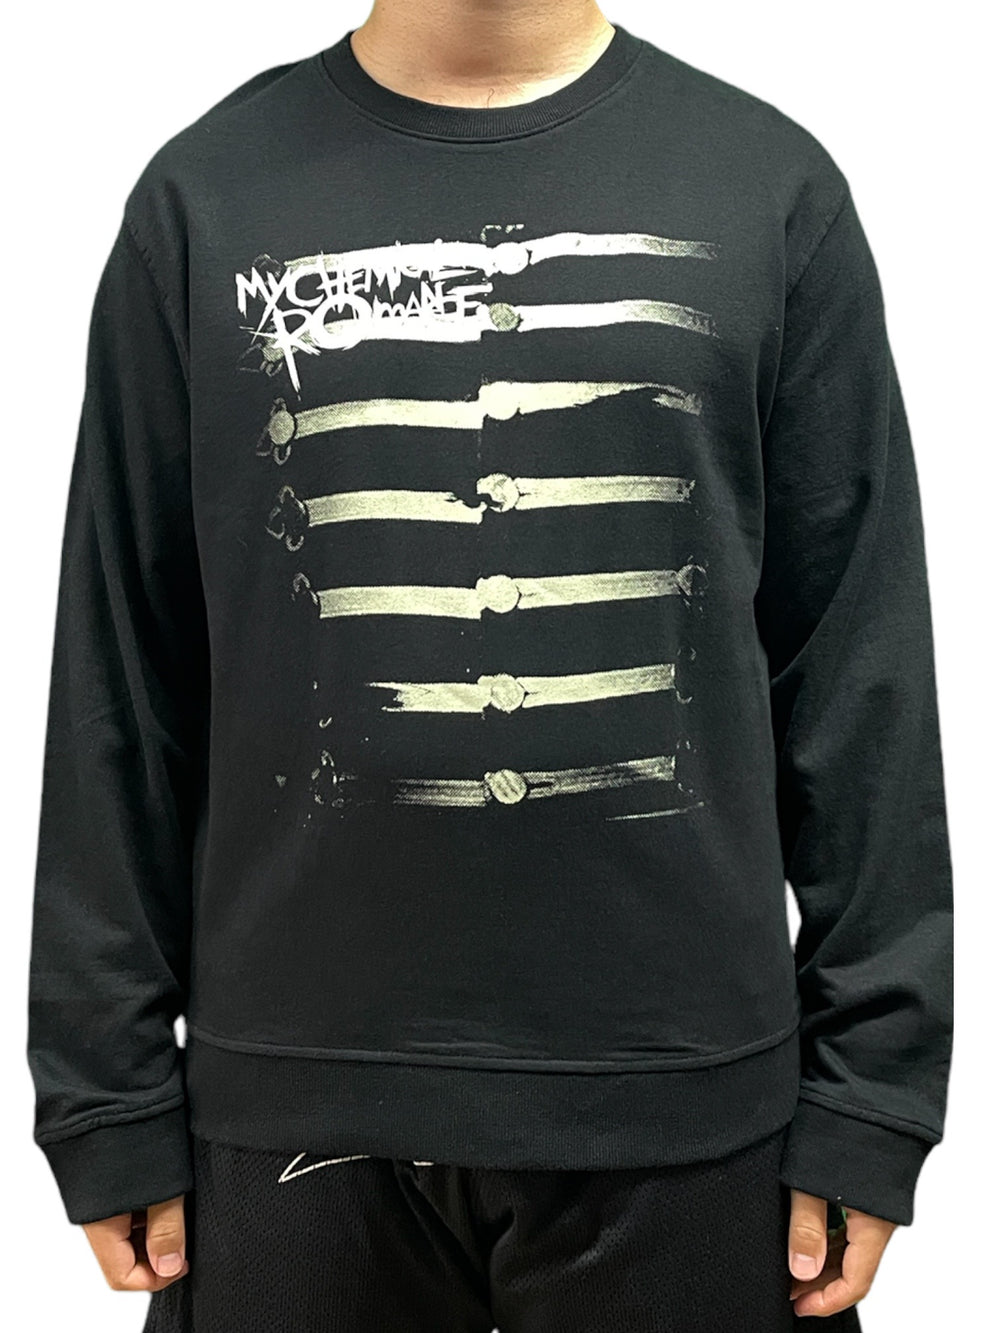 My Chemical Romance We March Fleece Sweater Long Sleeved Brand New